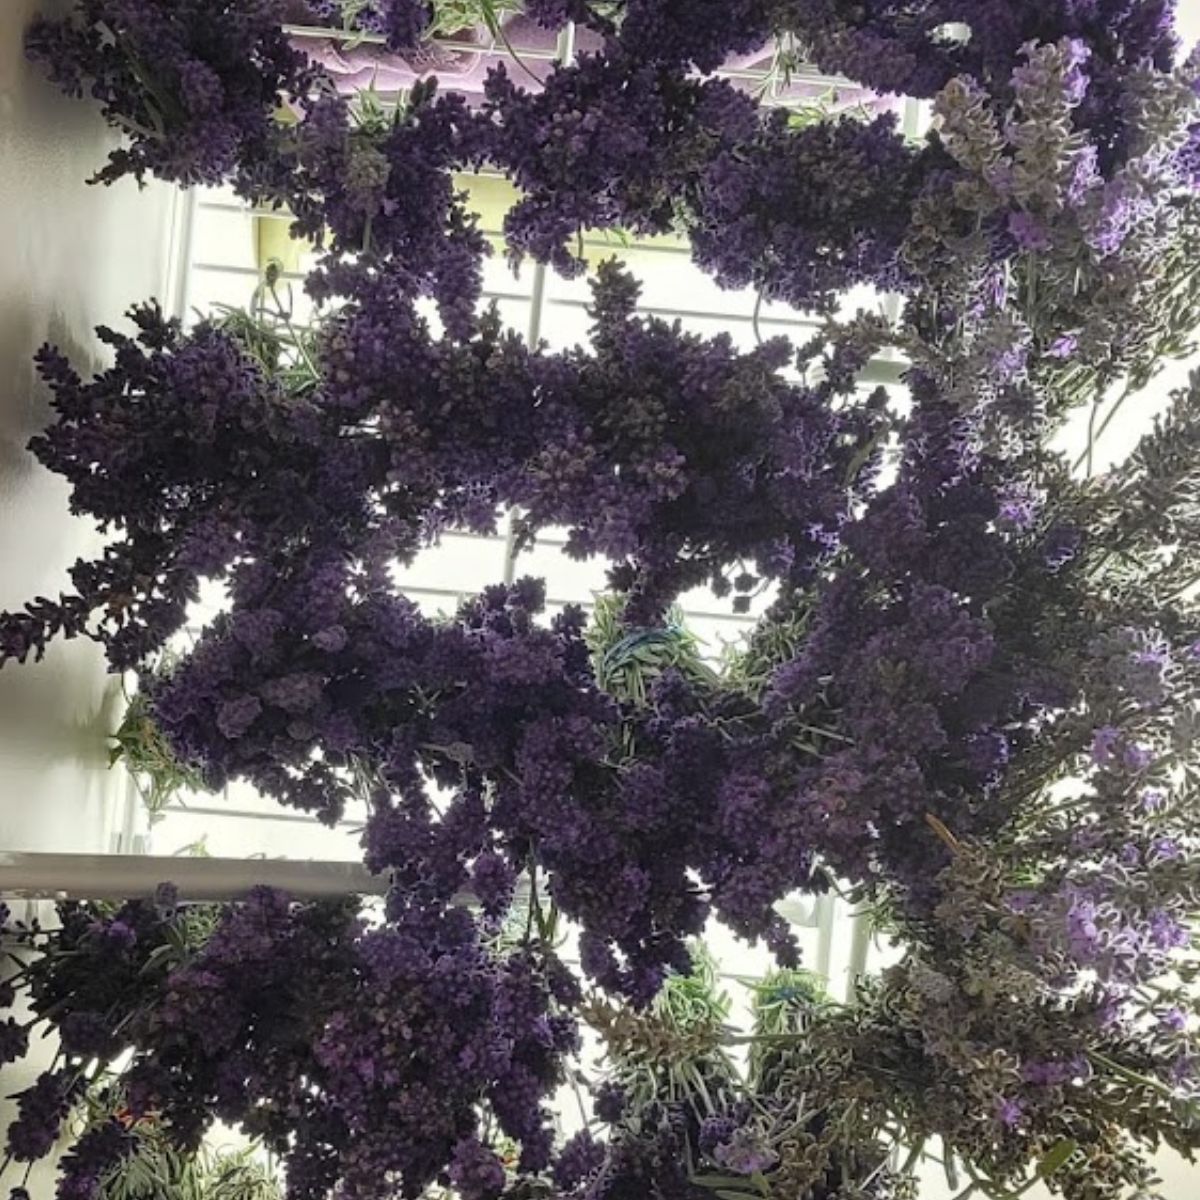 Lavender hanging to dry.